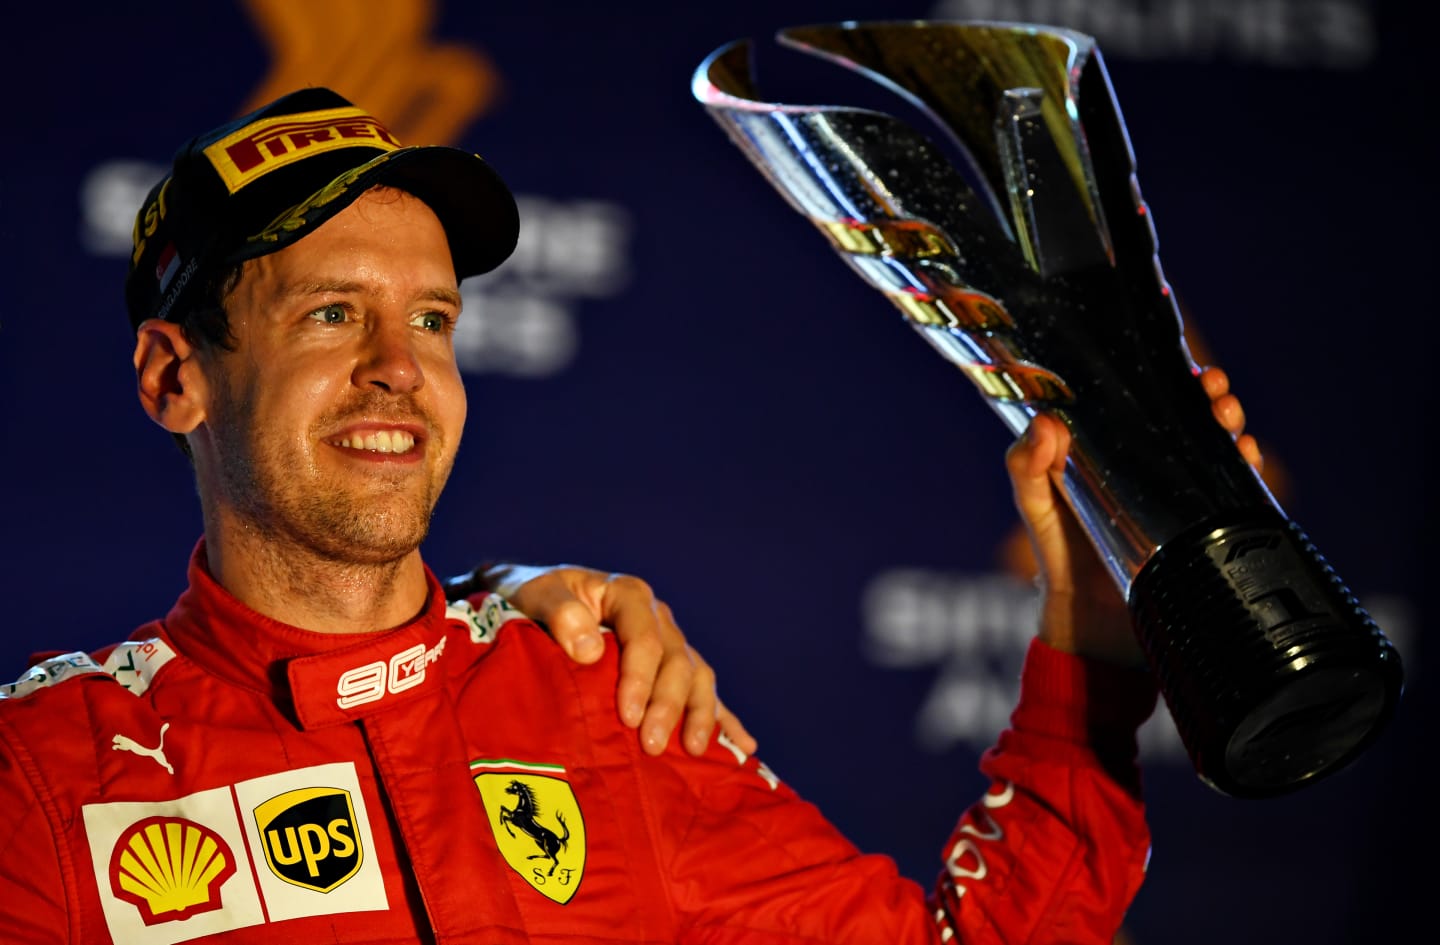 SINGAPORE, SINGAPORE - SEPTEMBER 22: Race winner Sebastian Vettel of Germany and Ferrari celebrates on the podium during the F1 Grand Prix of Singapore at Marina Bay Street Circuit on September 22, 2019 in Singapore. (Photo by Clive Mason/Getty Images)